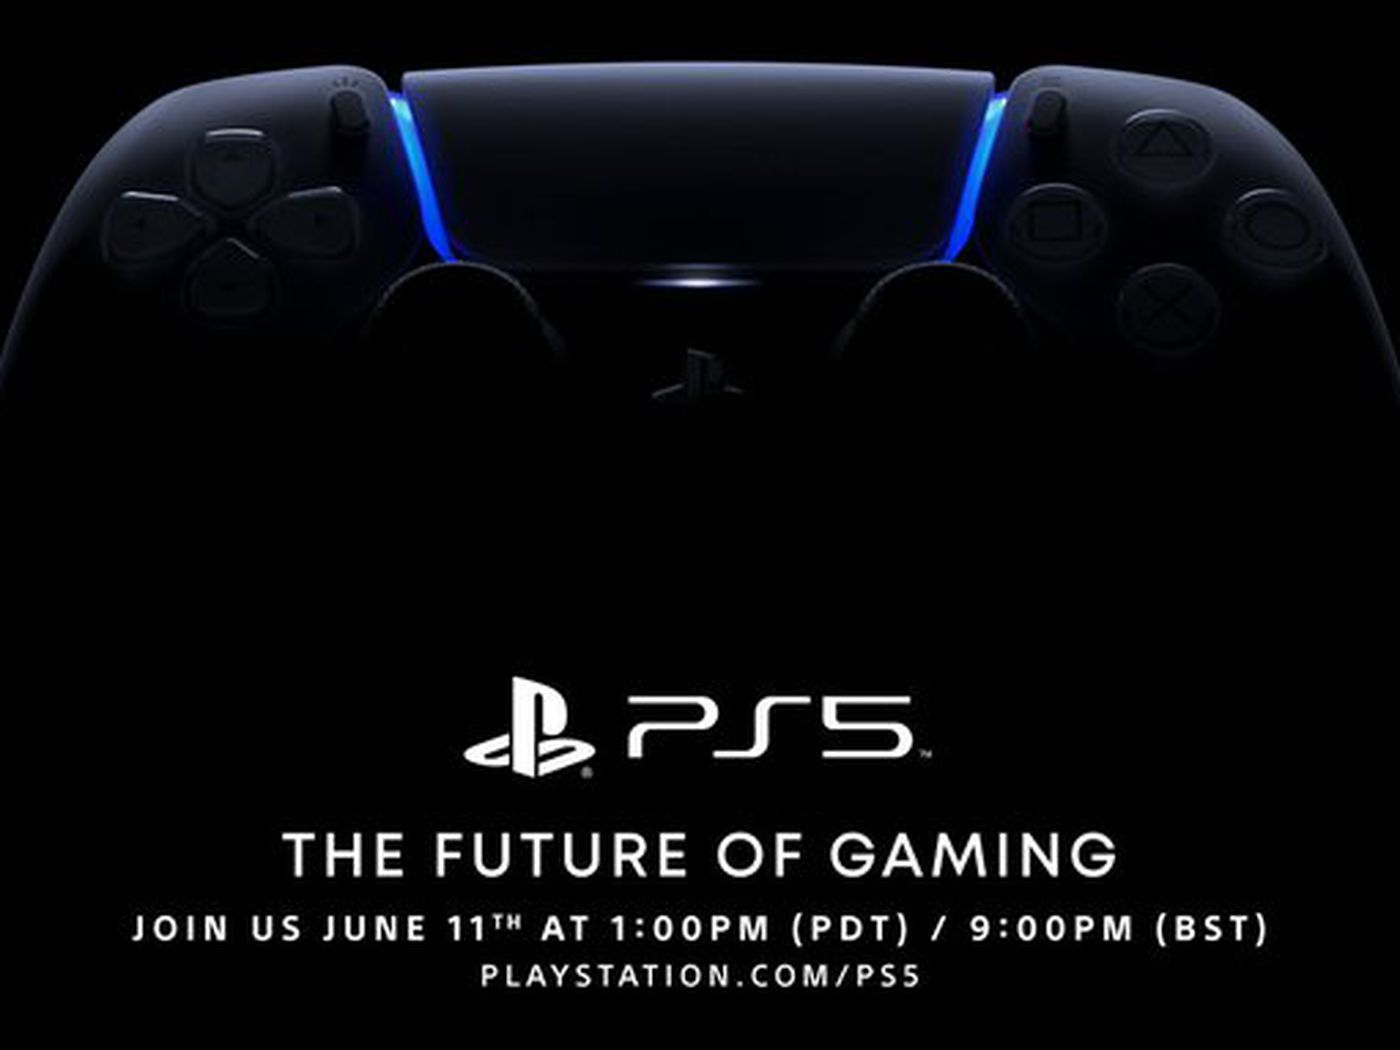 Sony's PS5 event rescheduled to June 11th